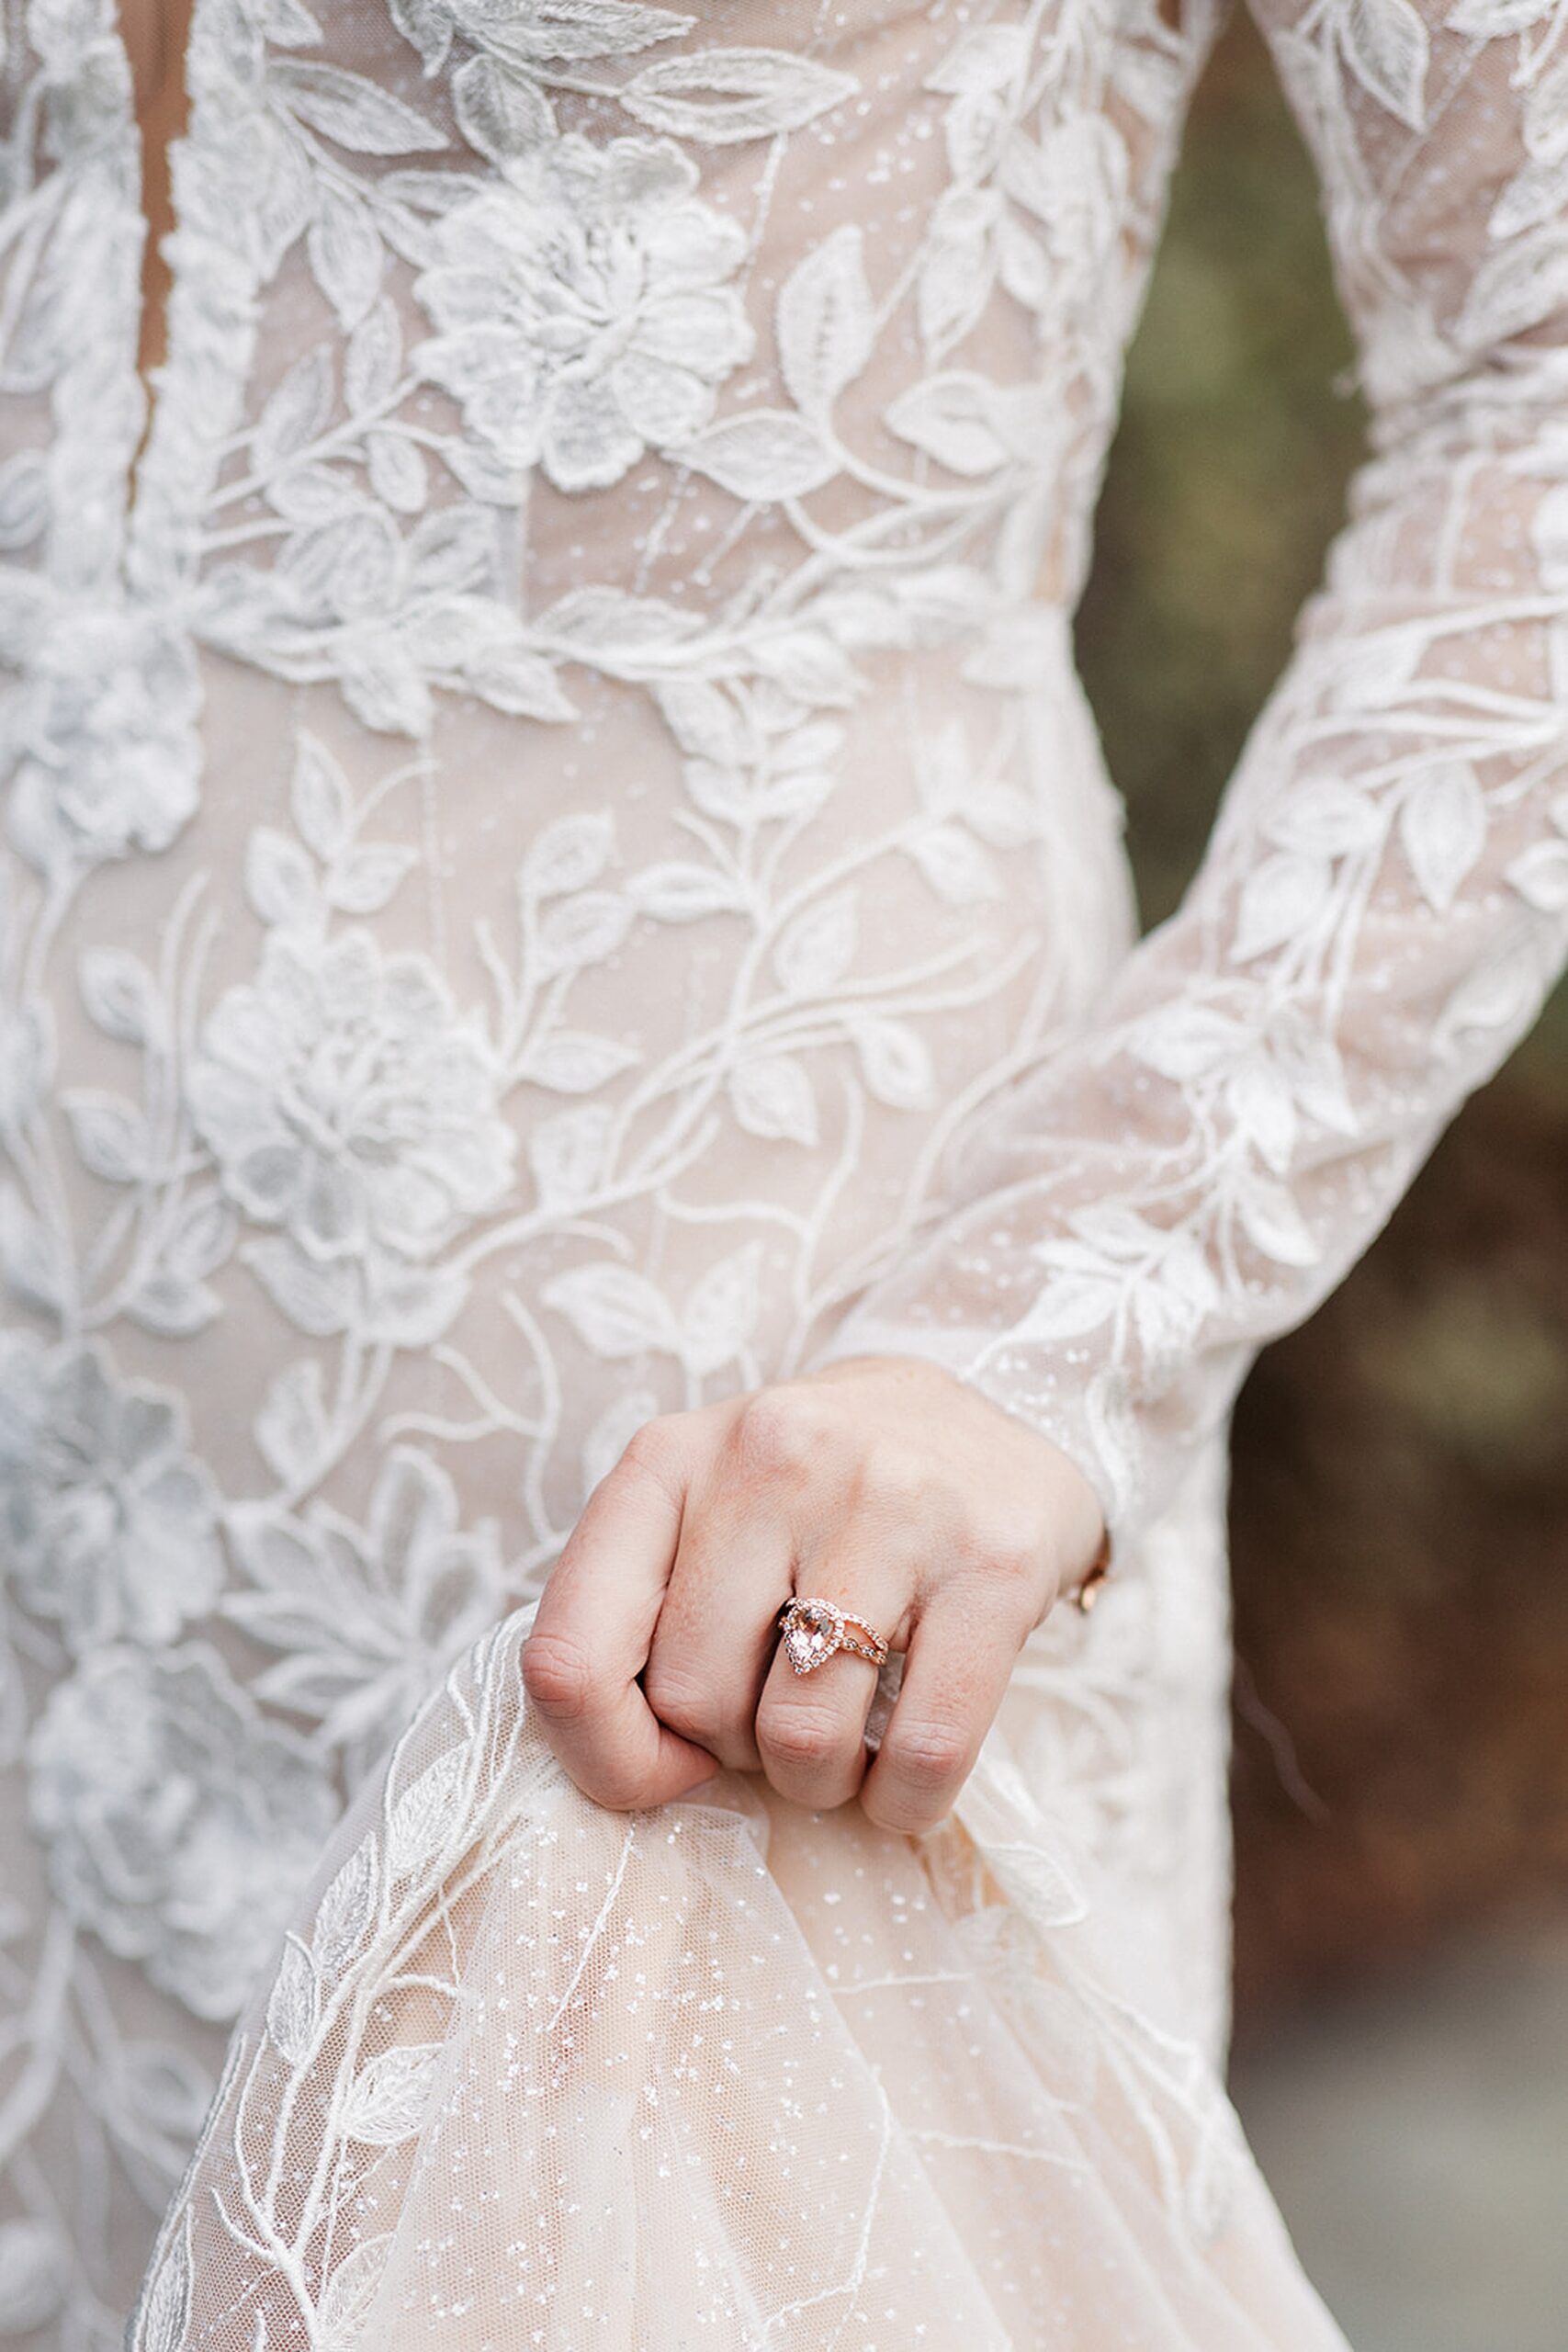 Details of a bride in a white lace dress holding her train while walking